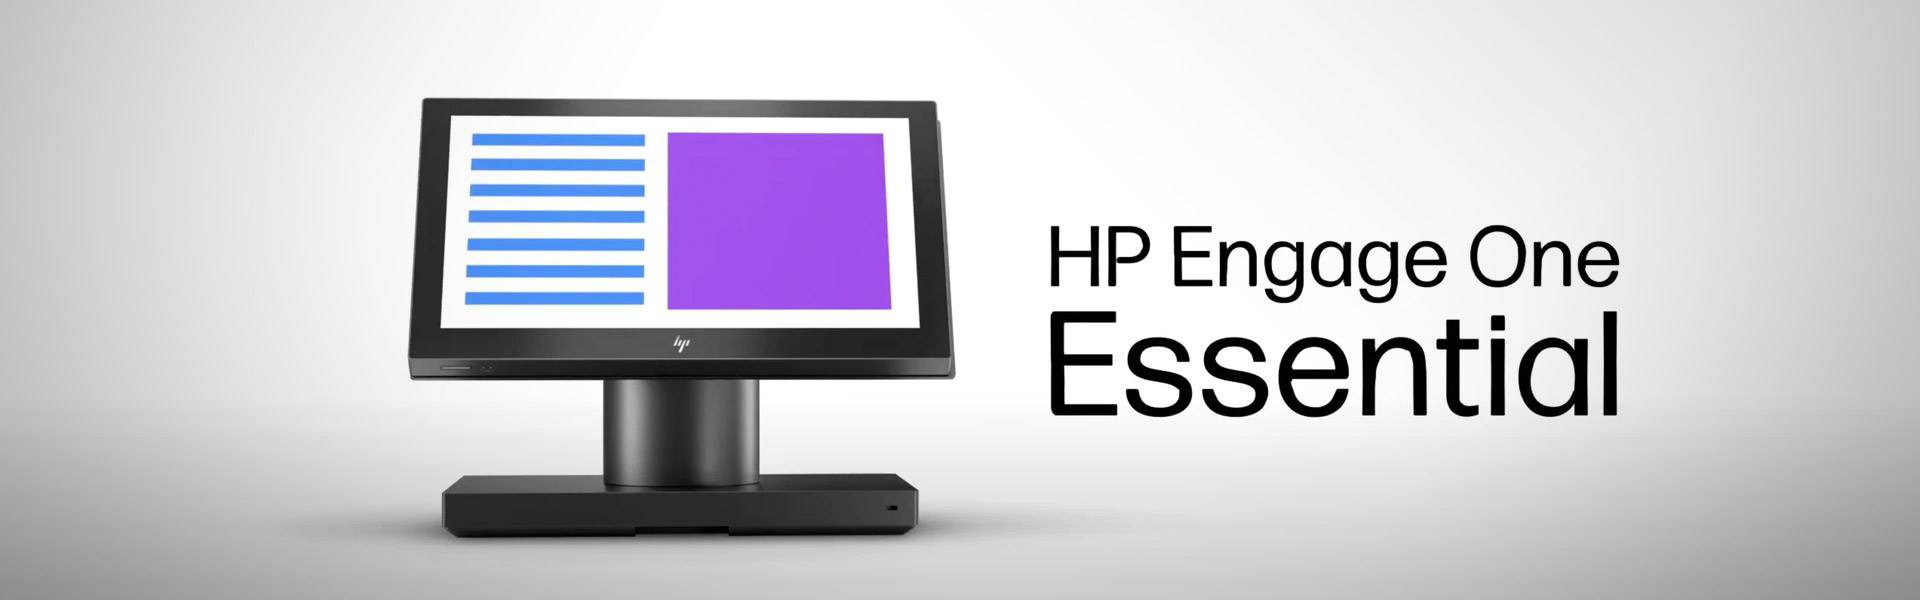 HP Engage One Essential